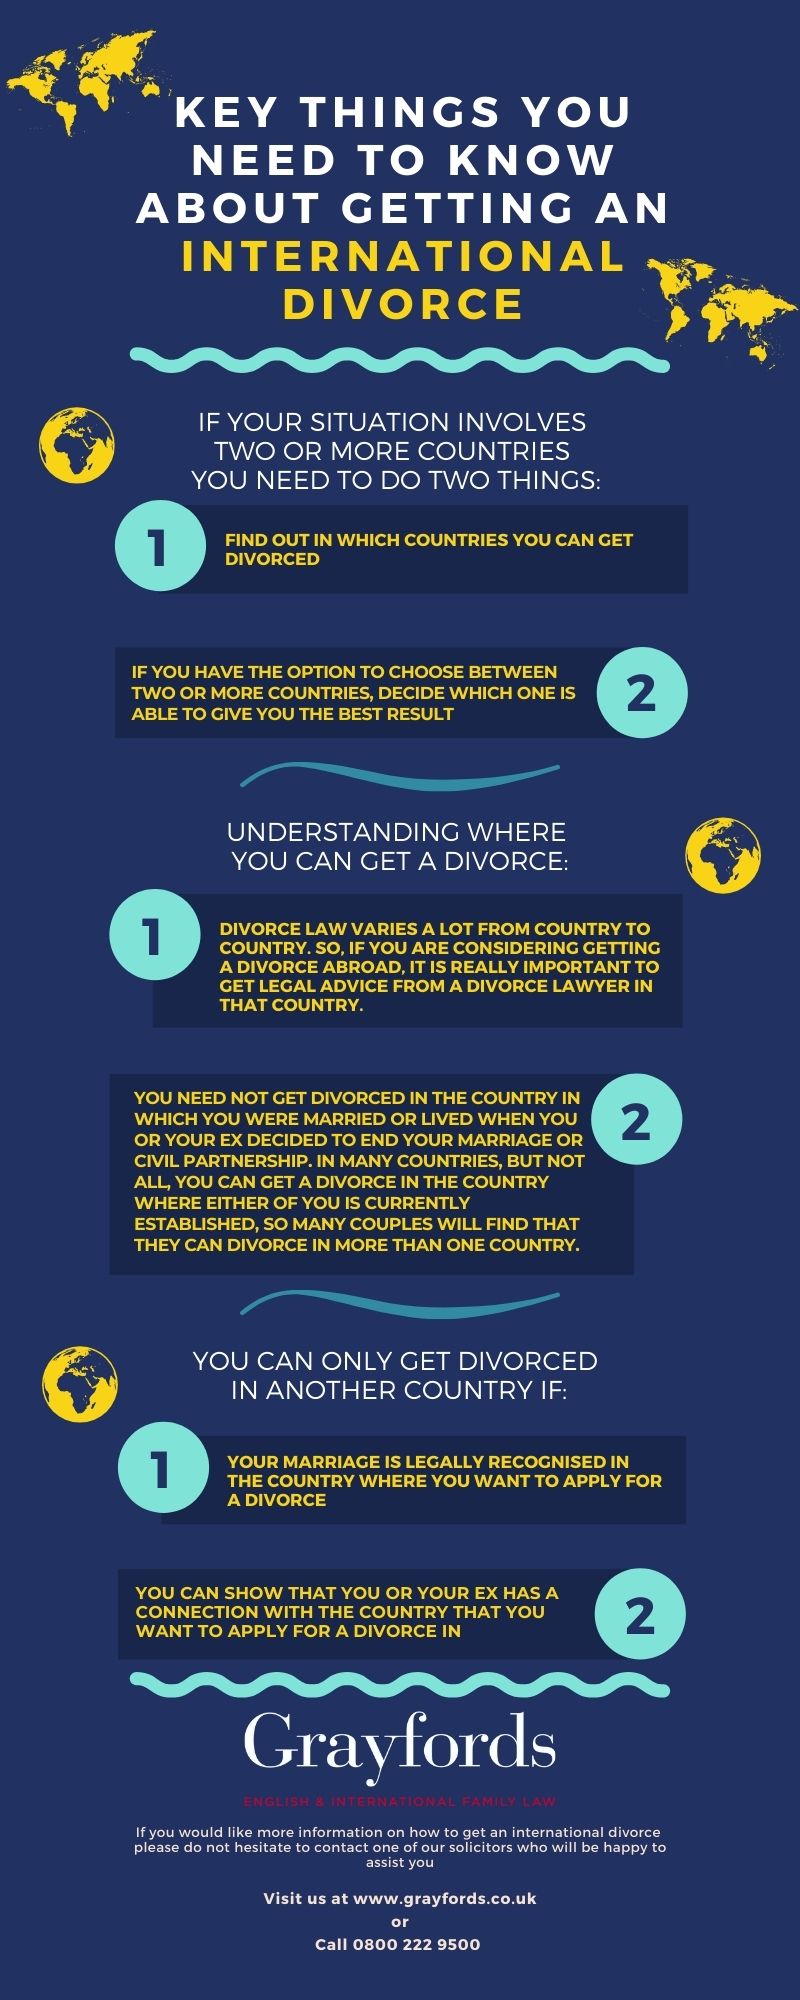 Key Things You Need To Know About Getting An International Divorce